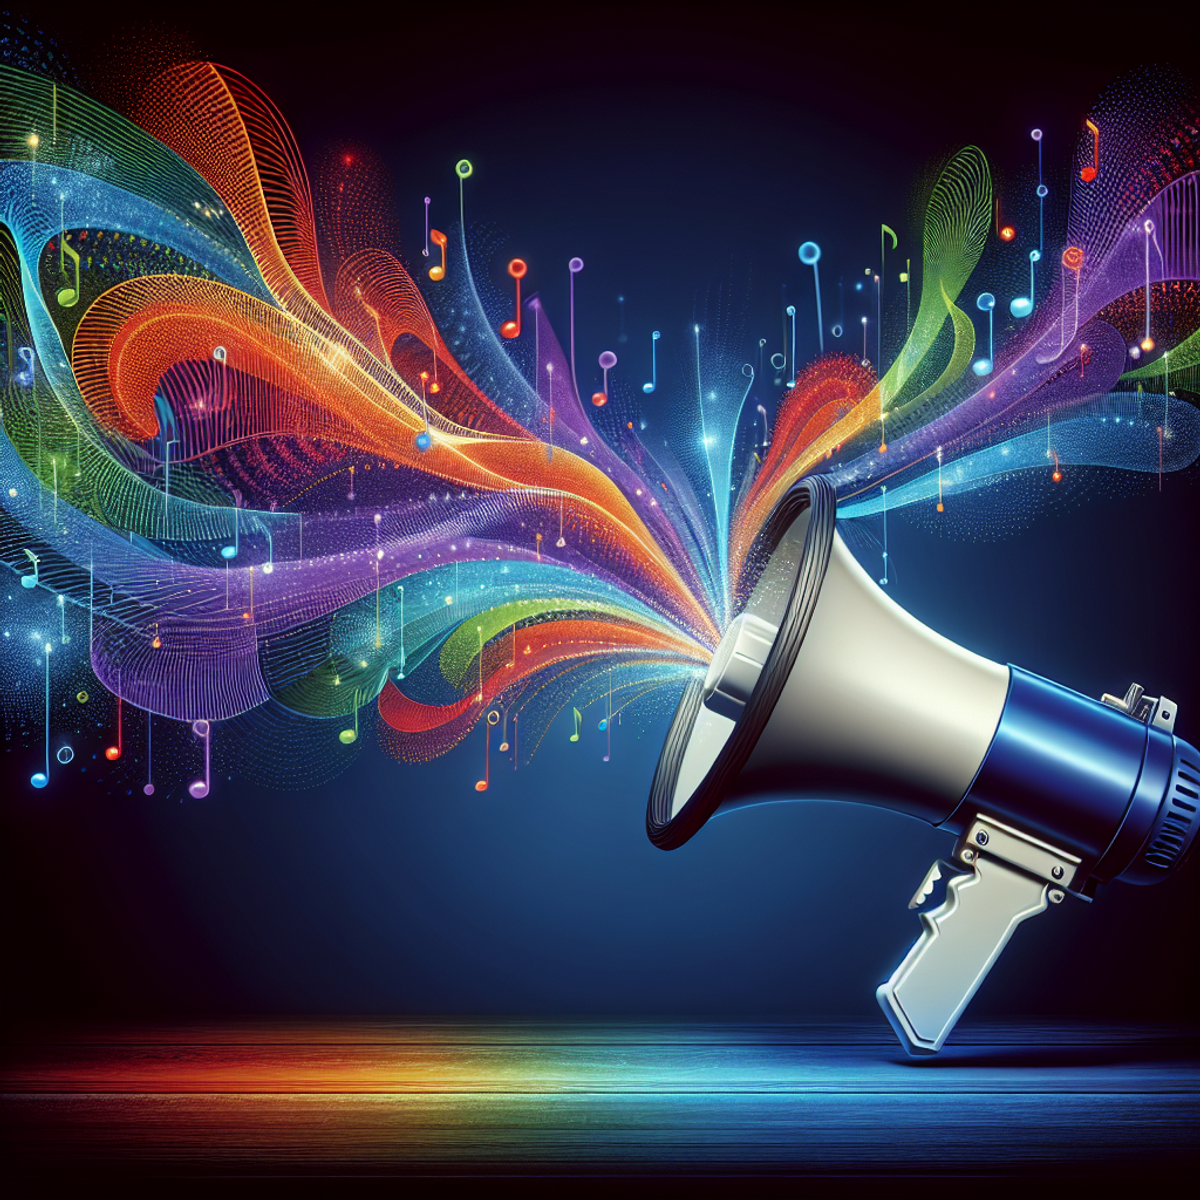 A megaphone with multicolored sound waves radiating from it.